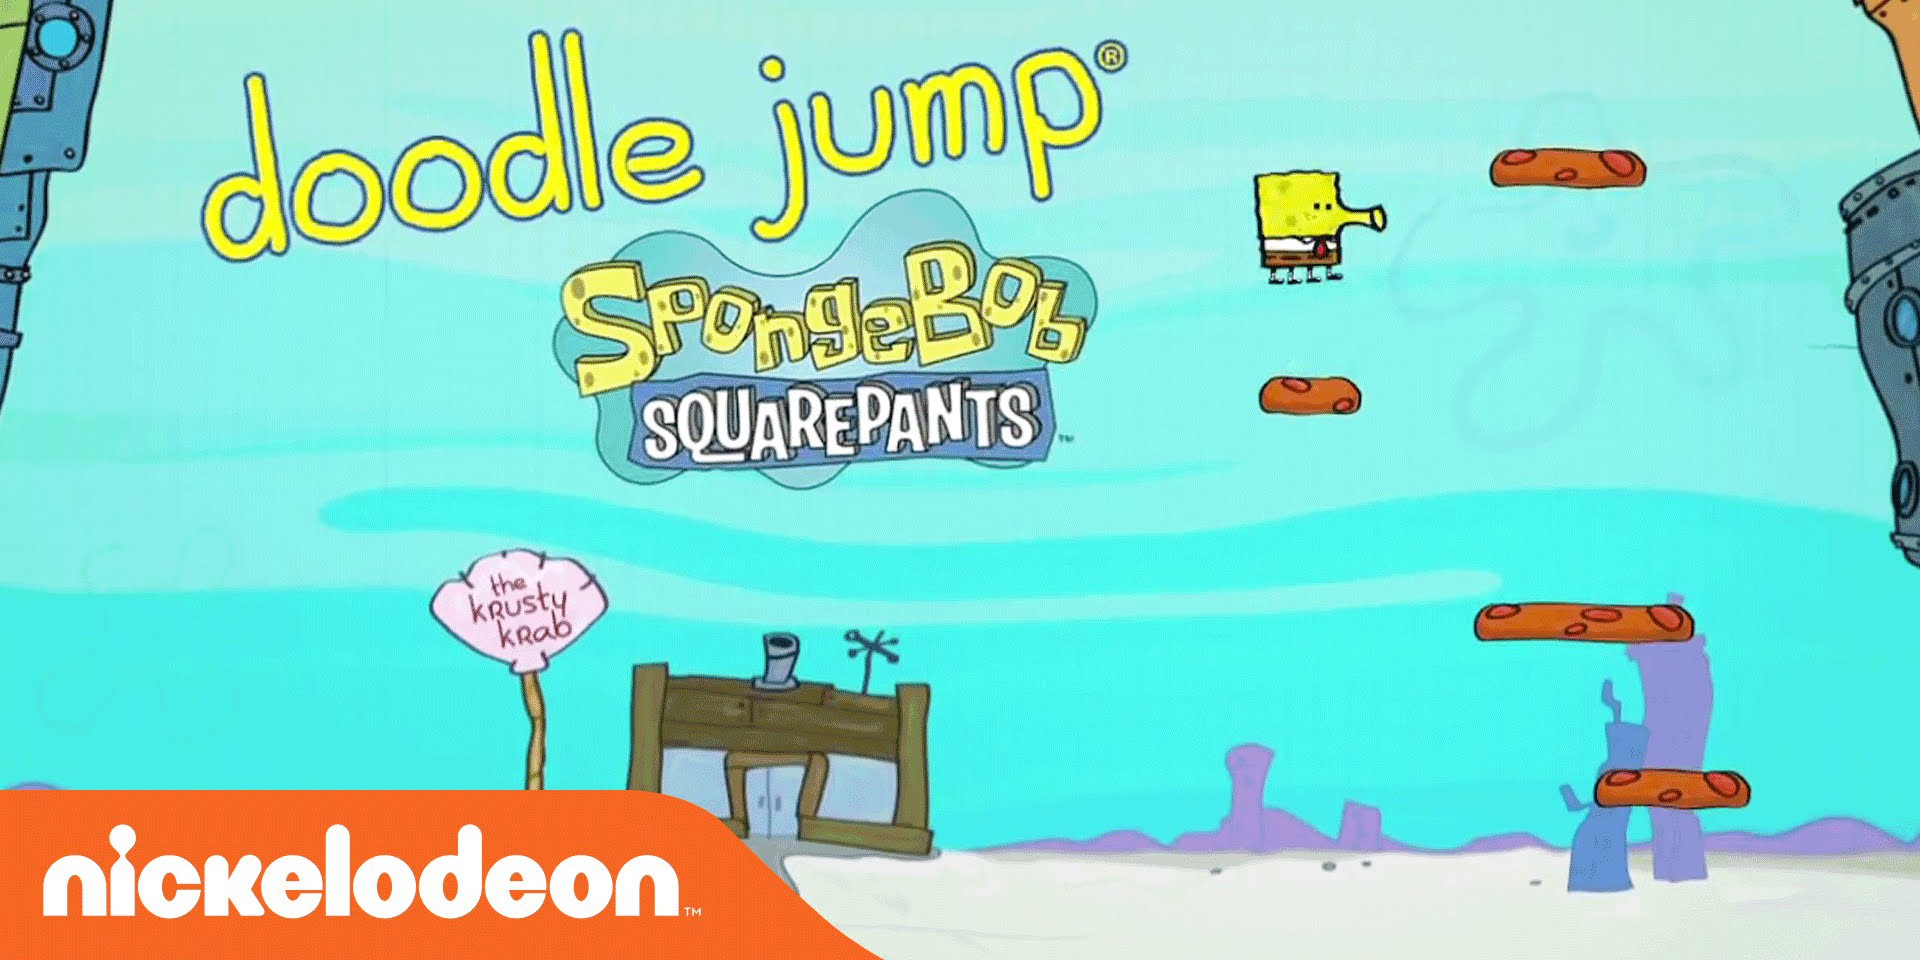 Doodle Jump SpongeBob SquarePants (iOS) Now Available For Just 99 Cents –  Nine Over Ten 9/10